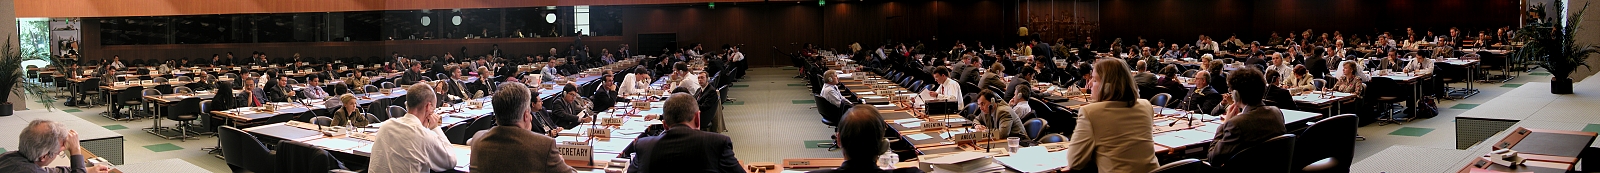 WTO agriculture negotiation meeting (Sept. 27, 2002).jpg (279489 byte)